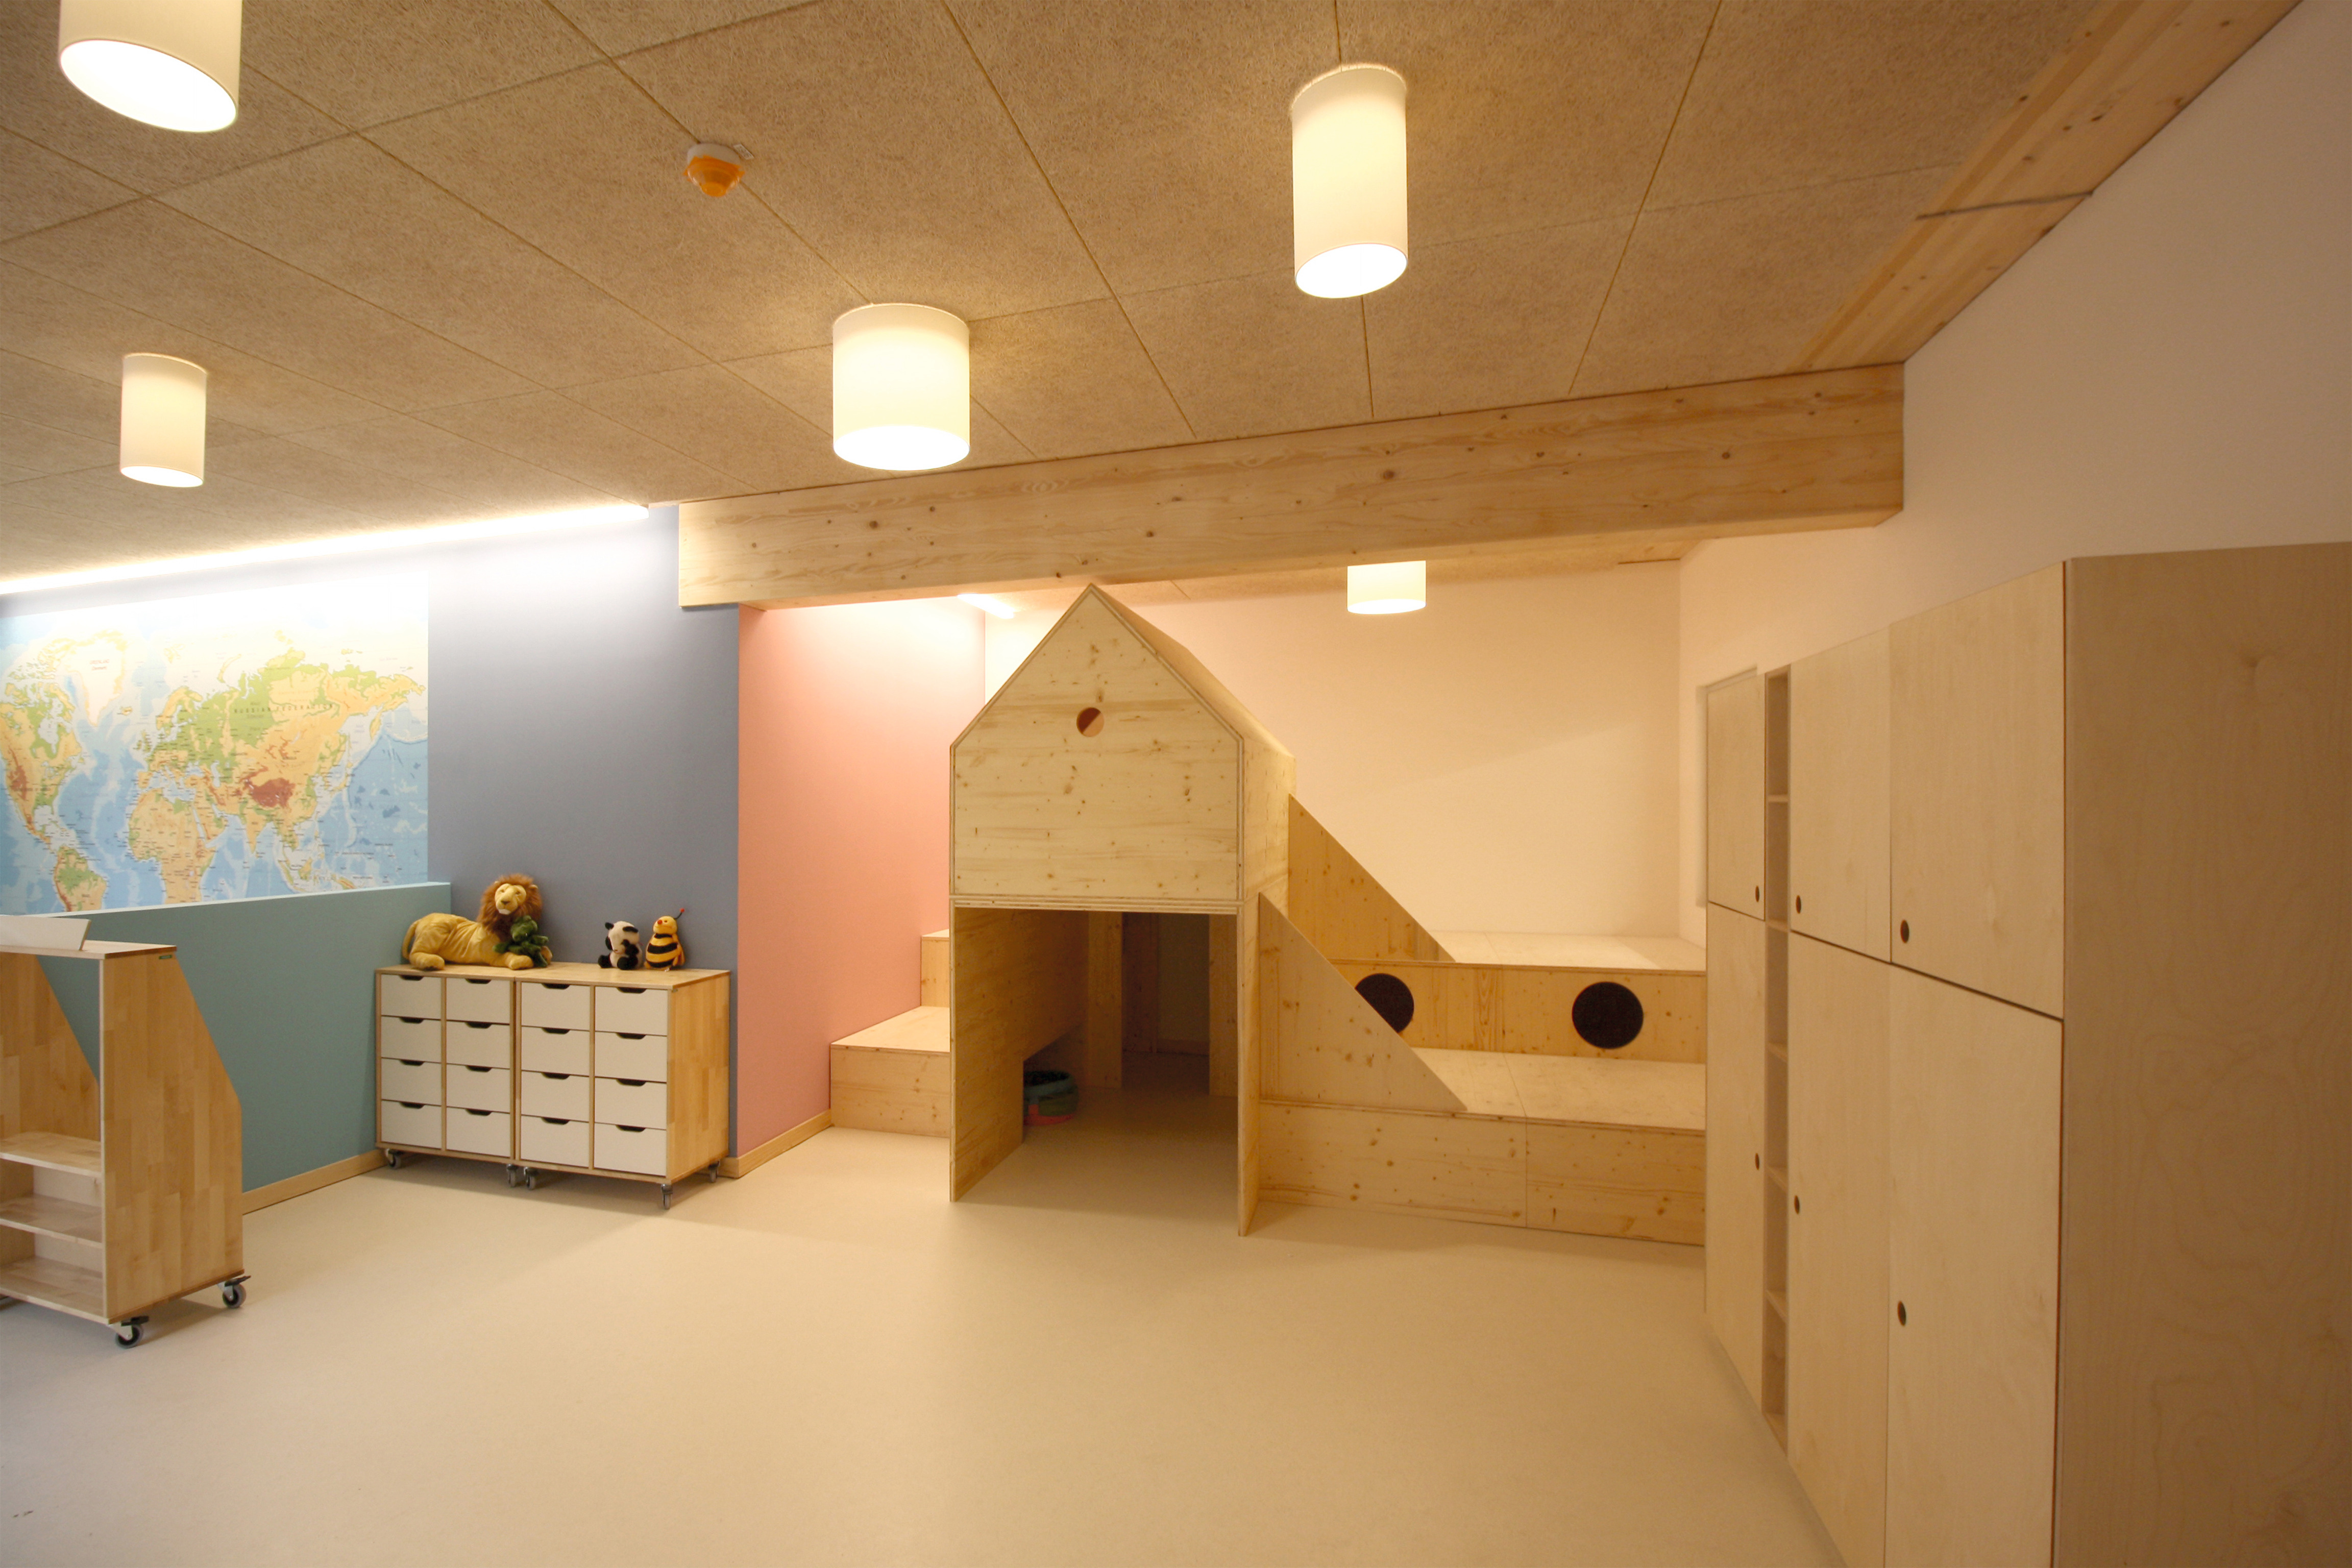 EGGER construction products OSB 4 TOP and DHF were used in the design.